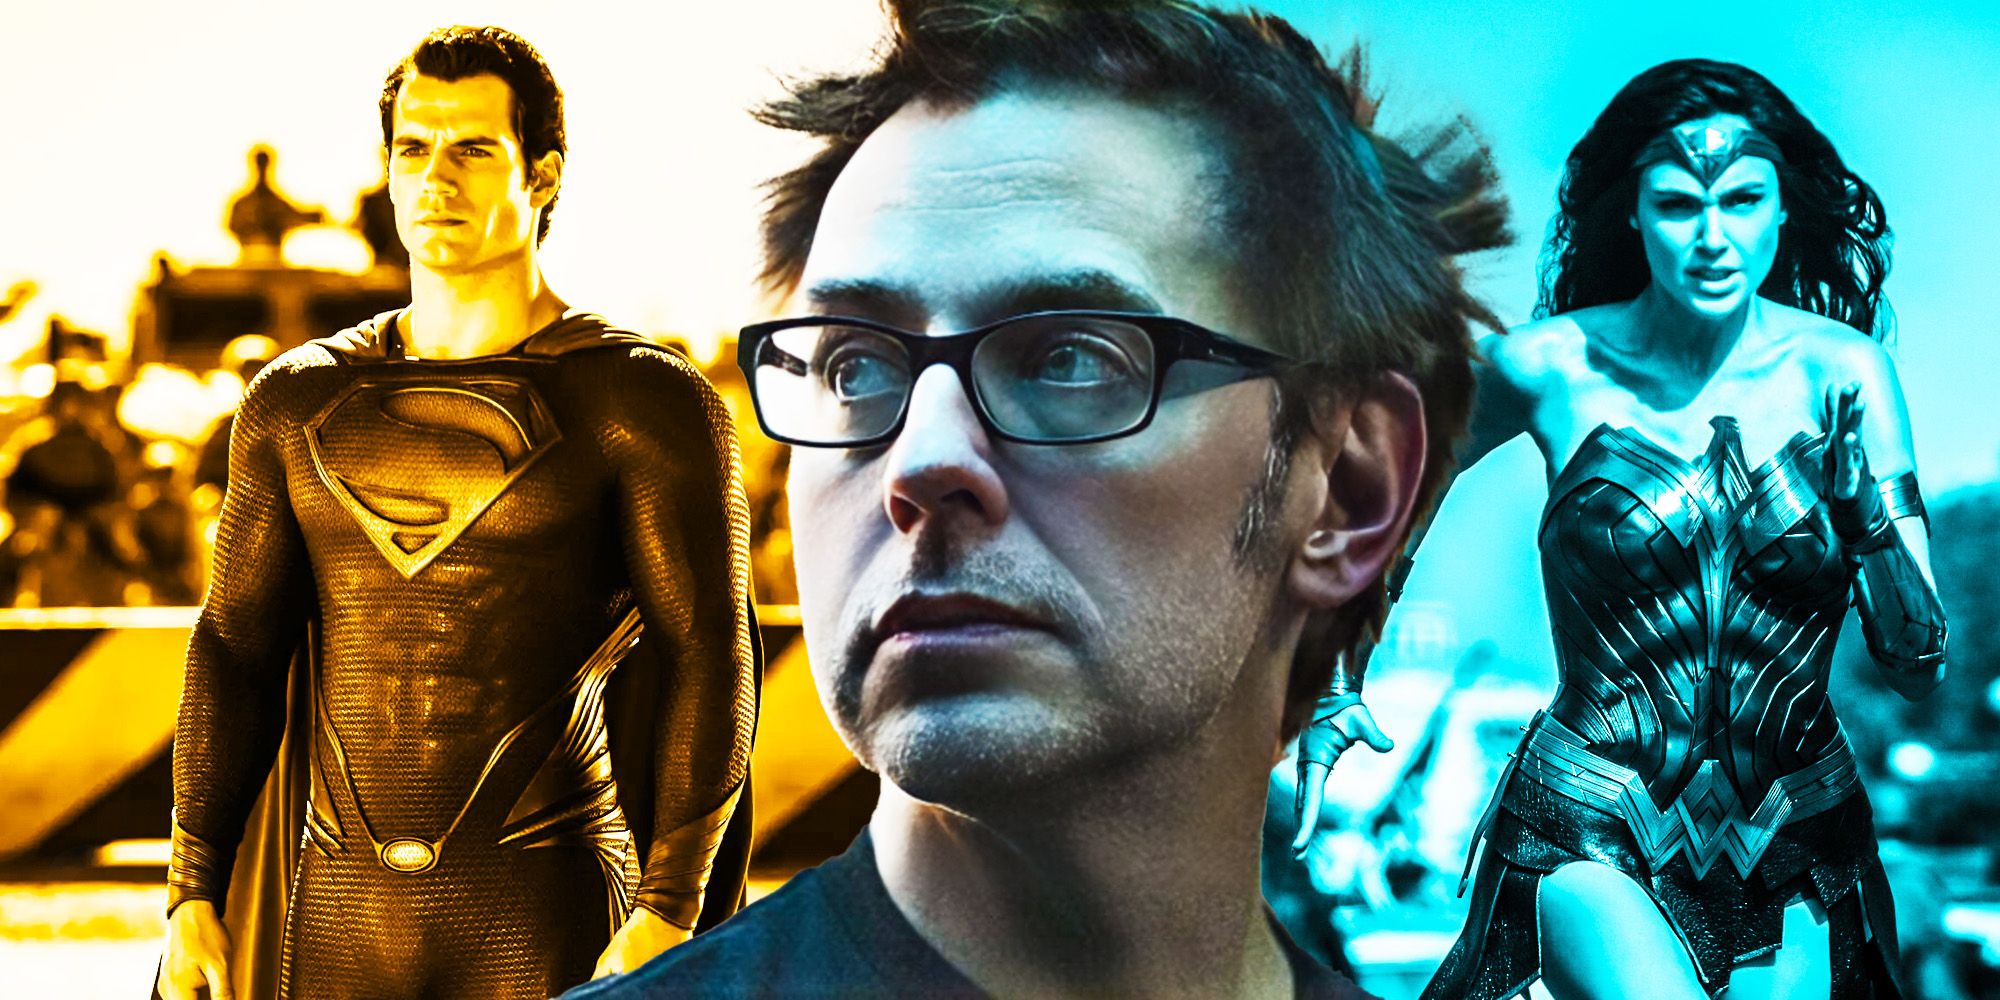 James Gunn Clarifies He's Not Making a Young Superman Movie, Just